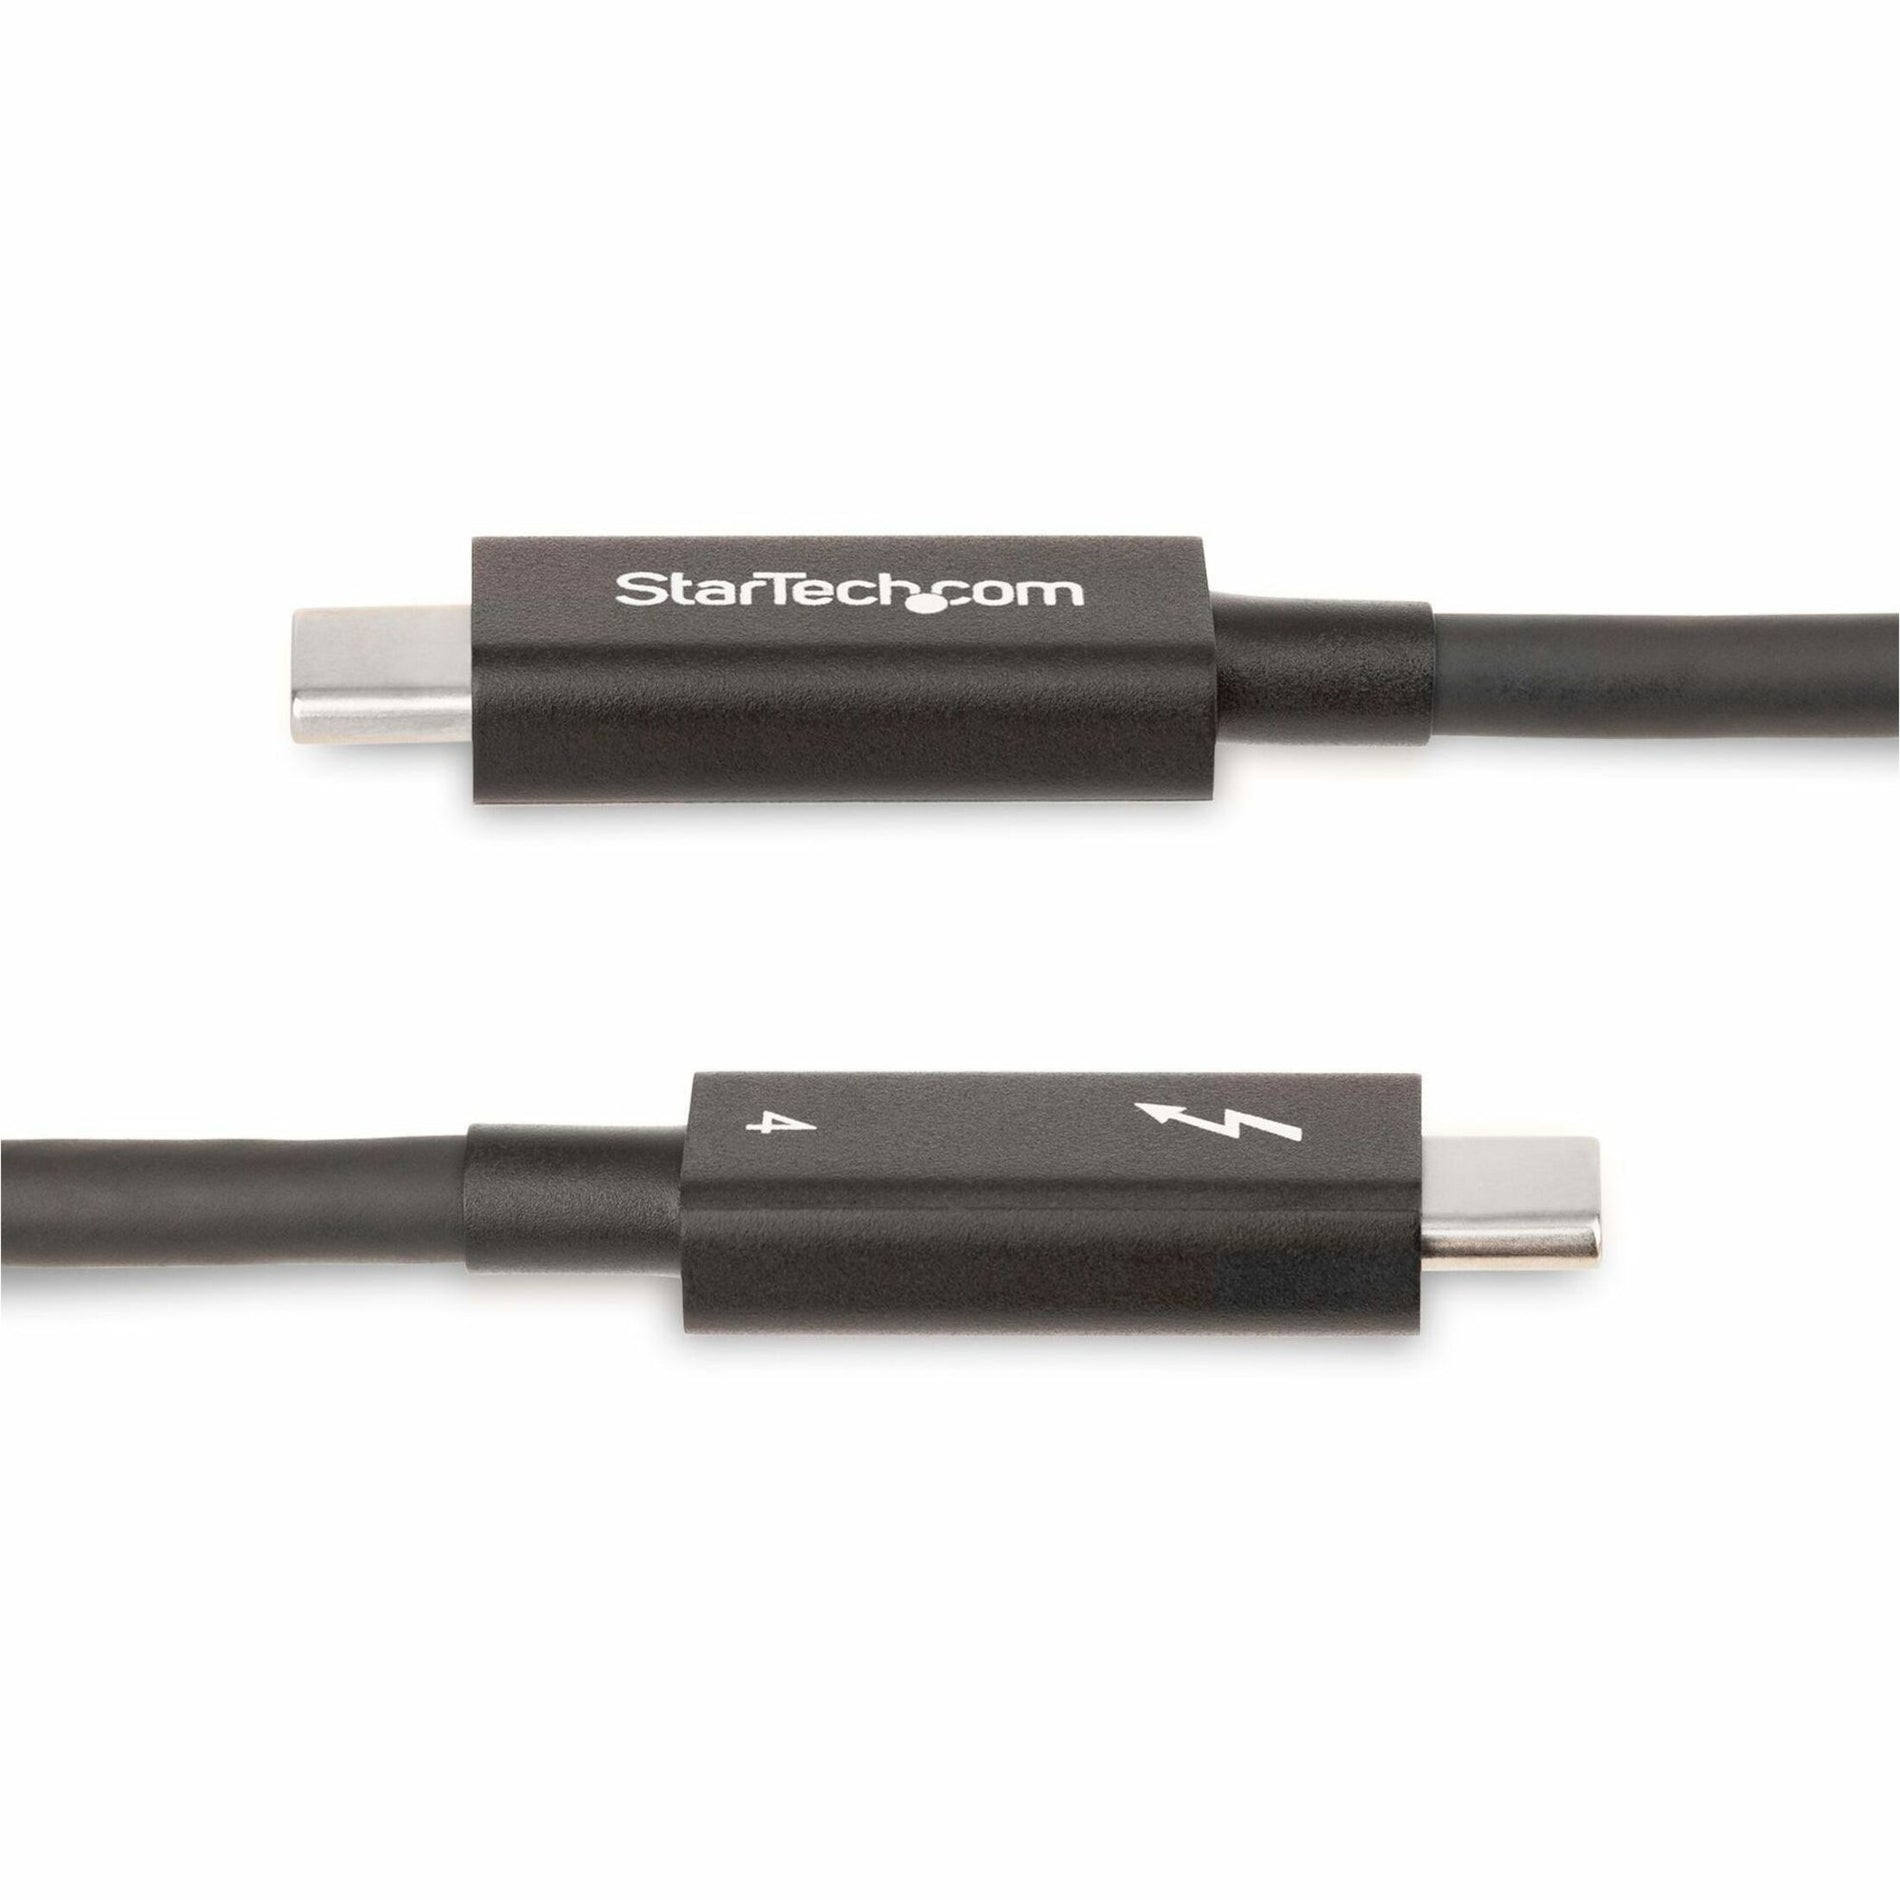 StarTech.com A40G2MB-TB4-CABLE Thunderbolt 4 Data Transfer Cable, 6 ft, 40 Gbit/s, Charging, Active, USB-Power Delivery (USB PD), Display Stream Compression (DSC), EMI Protection, Strain Relief, HDR Support, Power Delivery 3.0